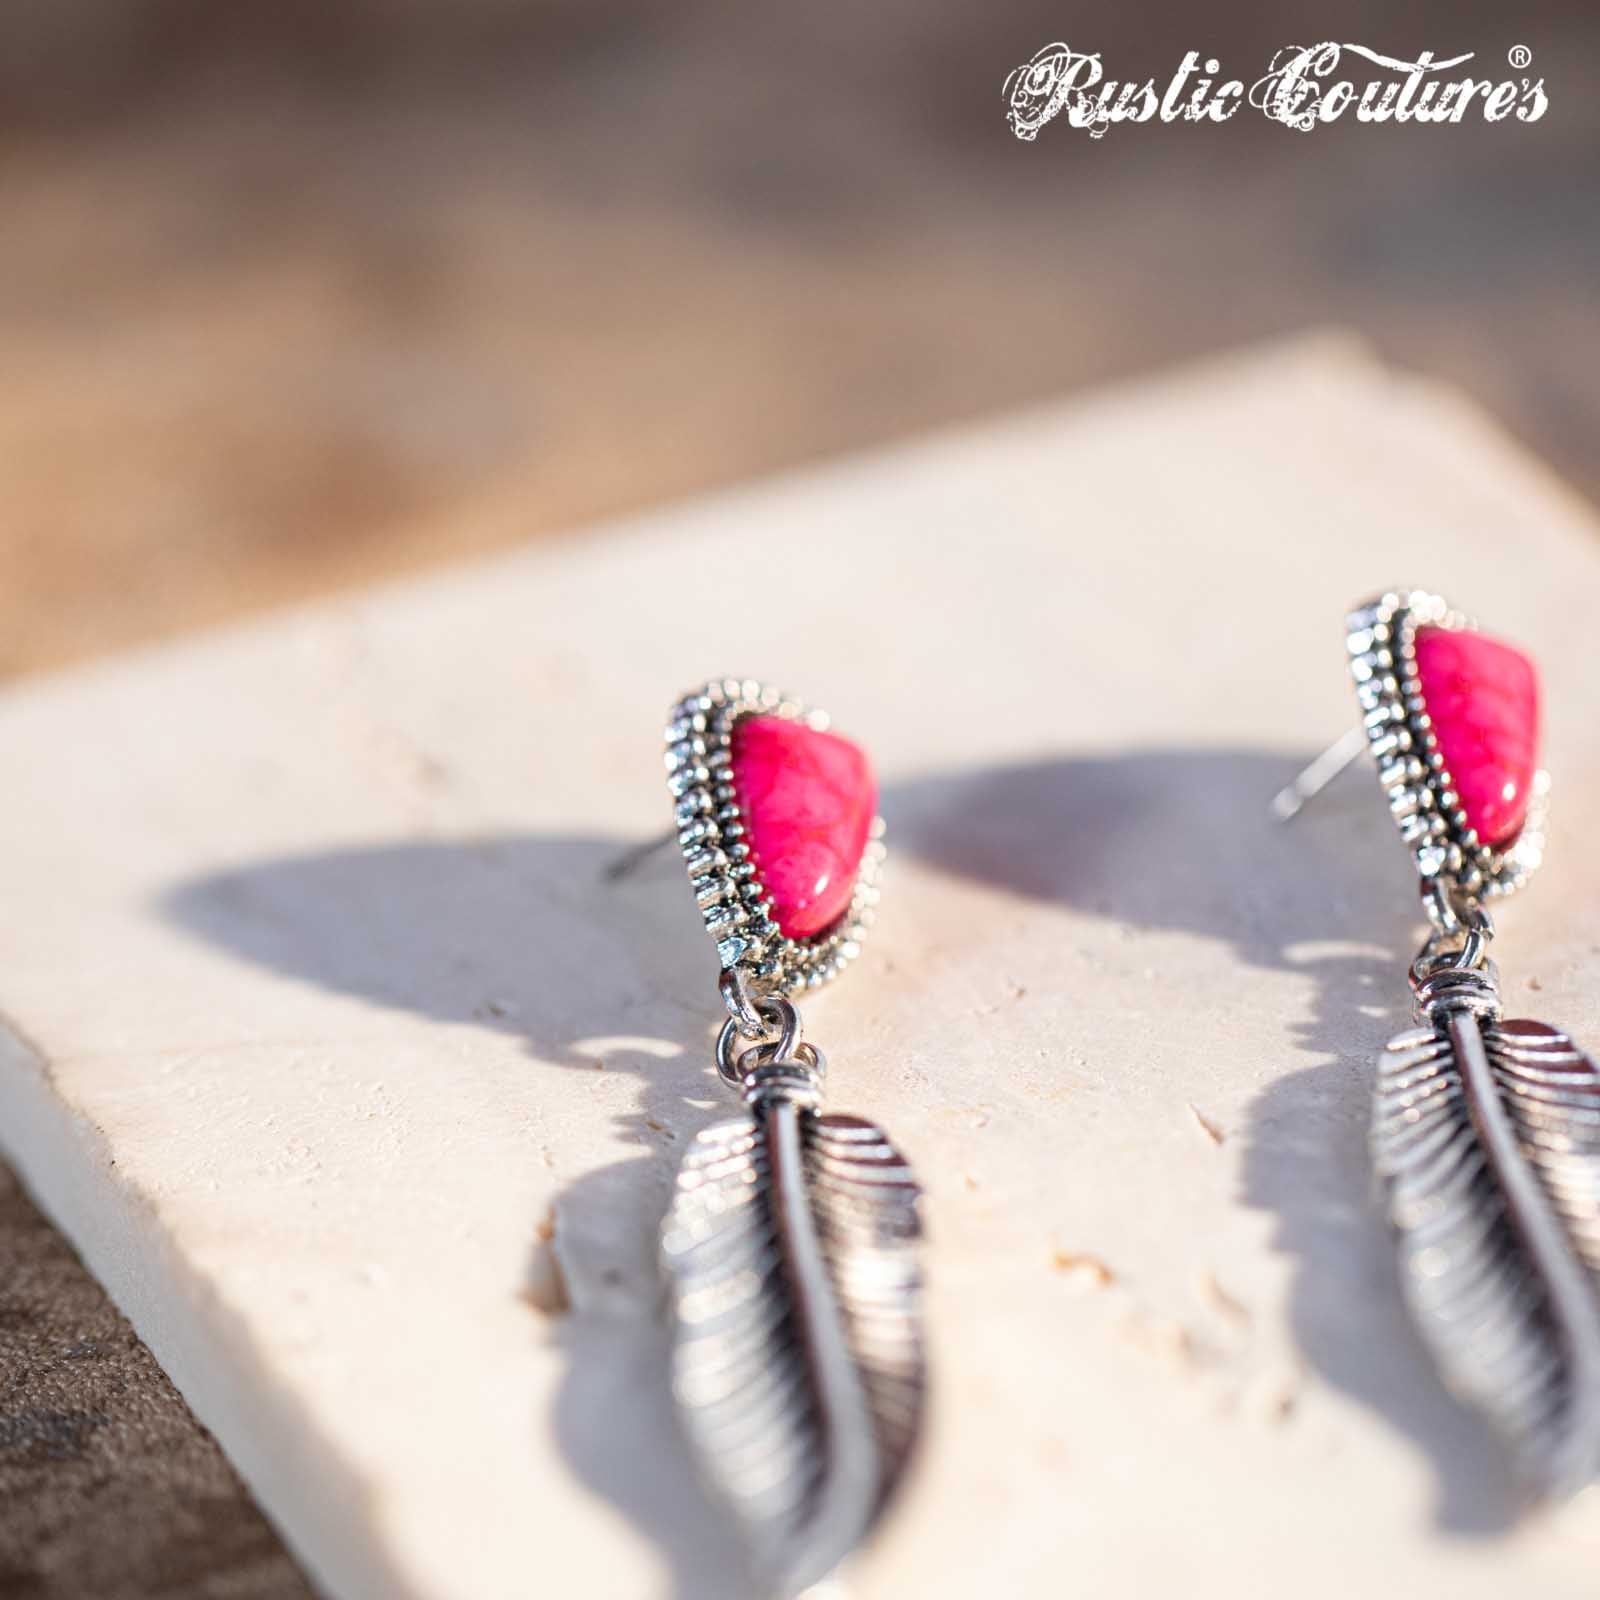 Rustic Couture's Hot Pink Nature Stone with Feather Silver Dangling Earring